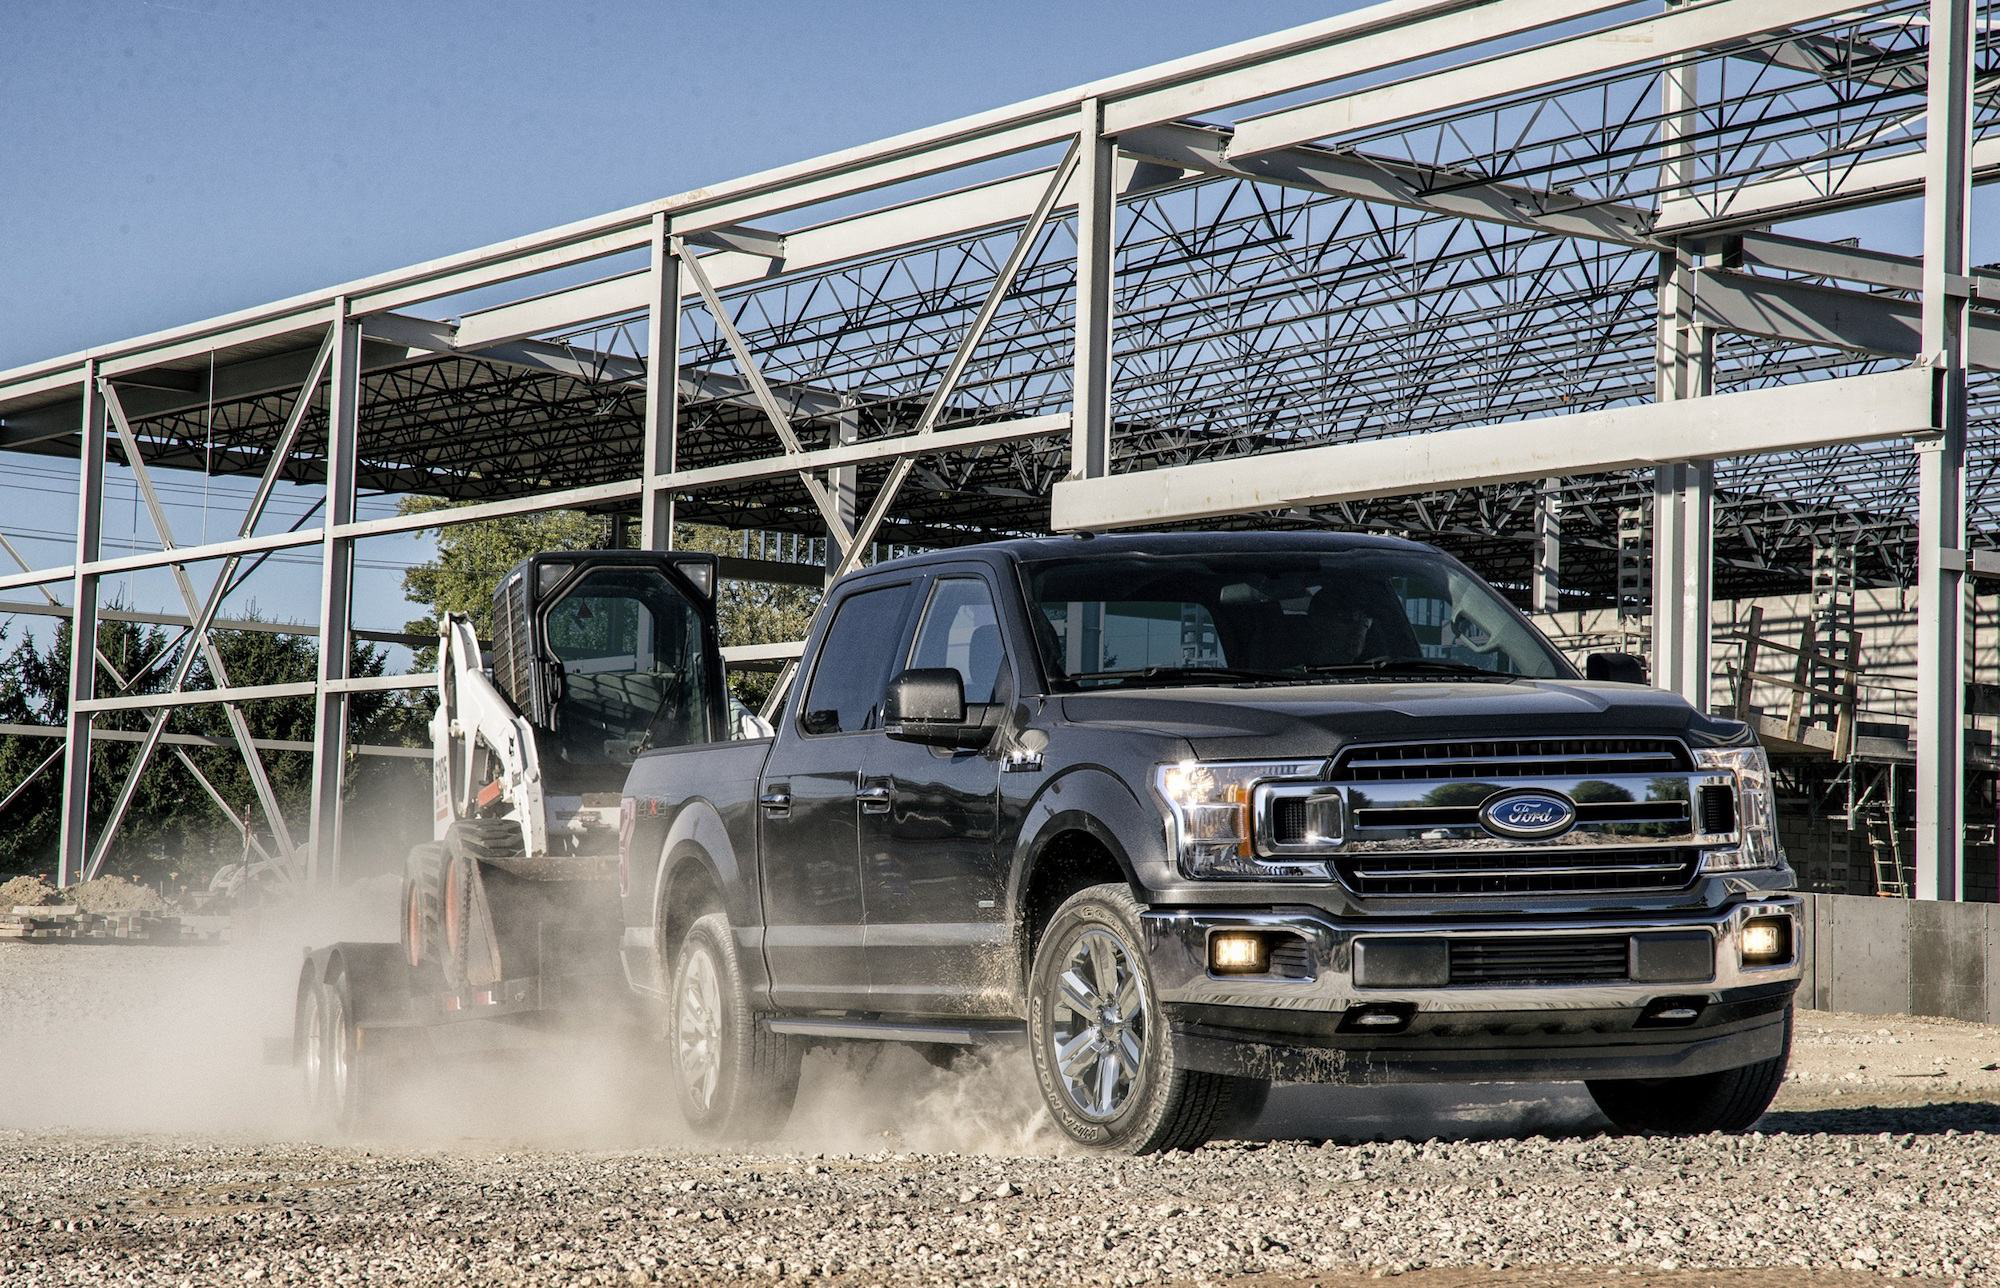 Ford's best F-150 engine lineup yet offers choice of top payload Best Truck For Towing And Gas Mileage